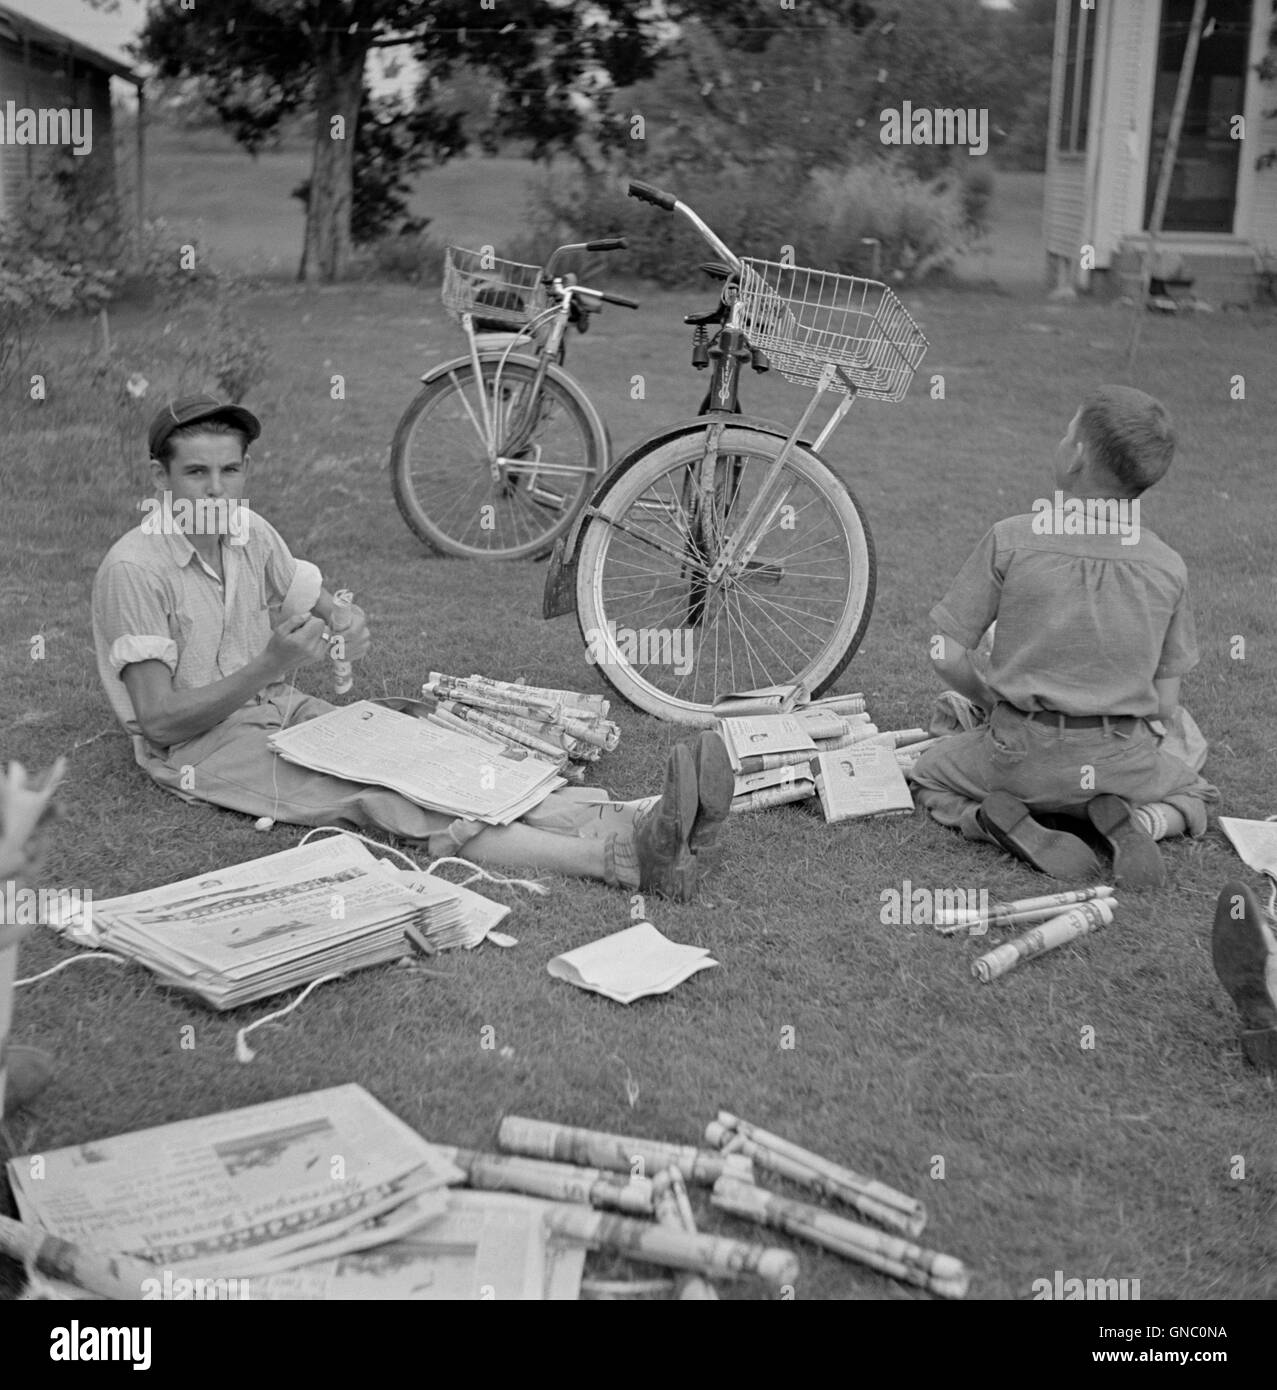 Two Boys Folding Newspapers before Starting their Afternoon Deliveries, near Natchitoches, Louisiana, USA, Marion Post Wolcott for Farm Security Administration, July 1940 Stock Photo